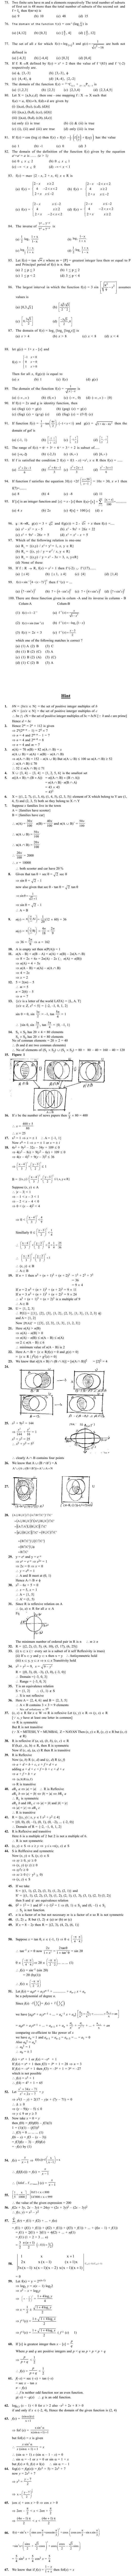 JEE Question Bank Maths - Sets, Relation and Functions